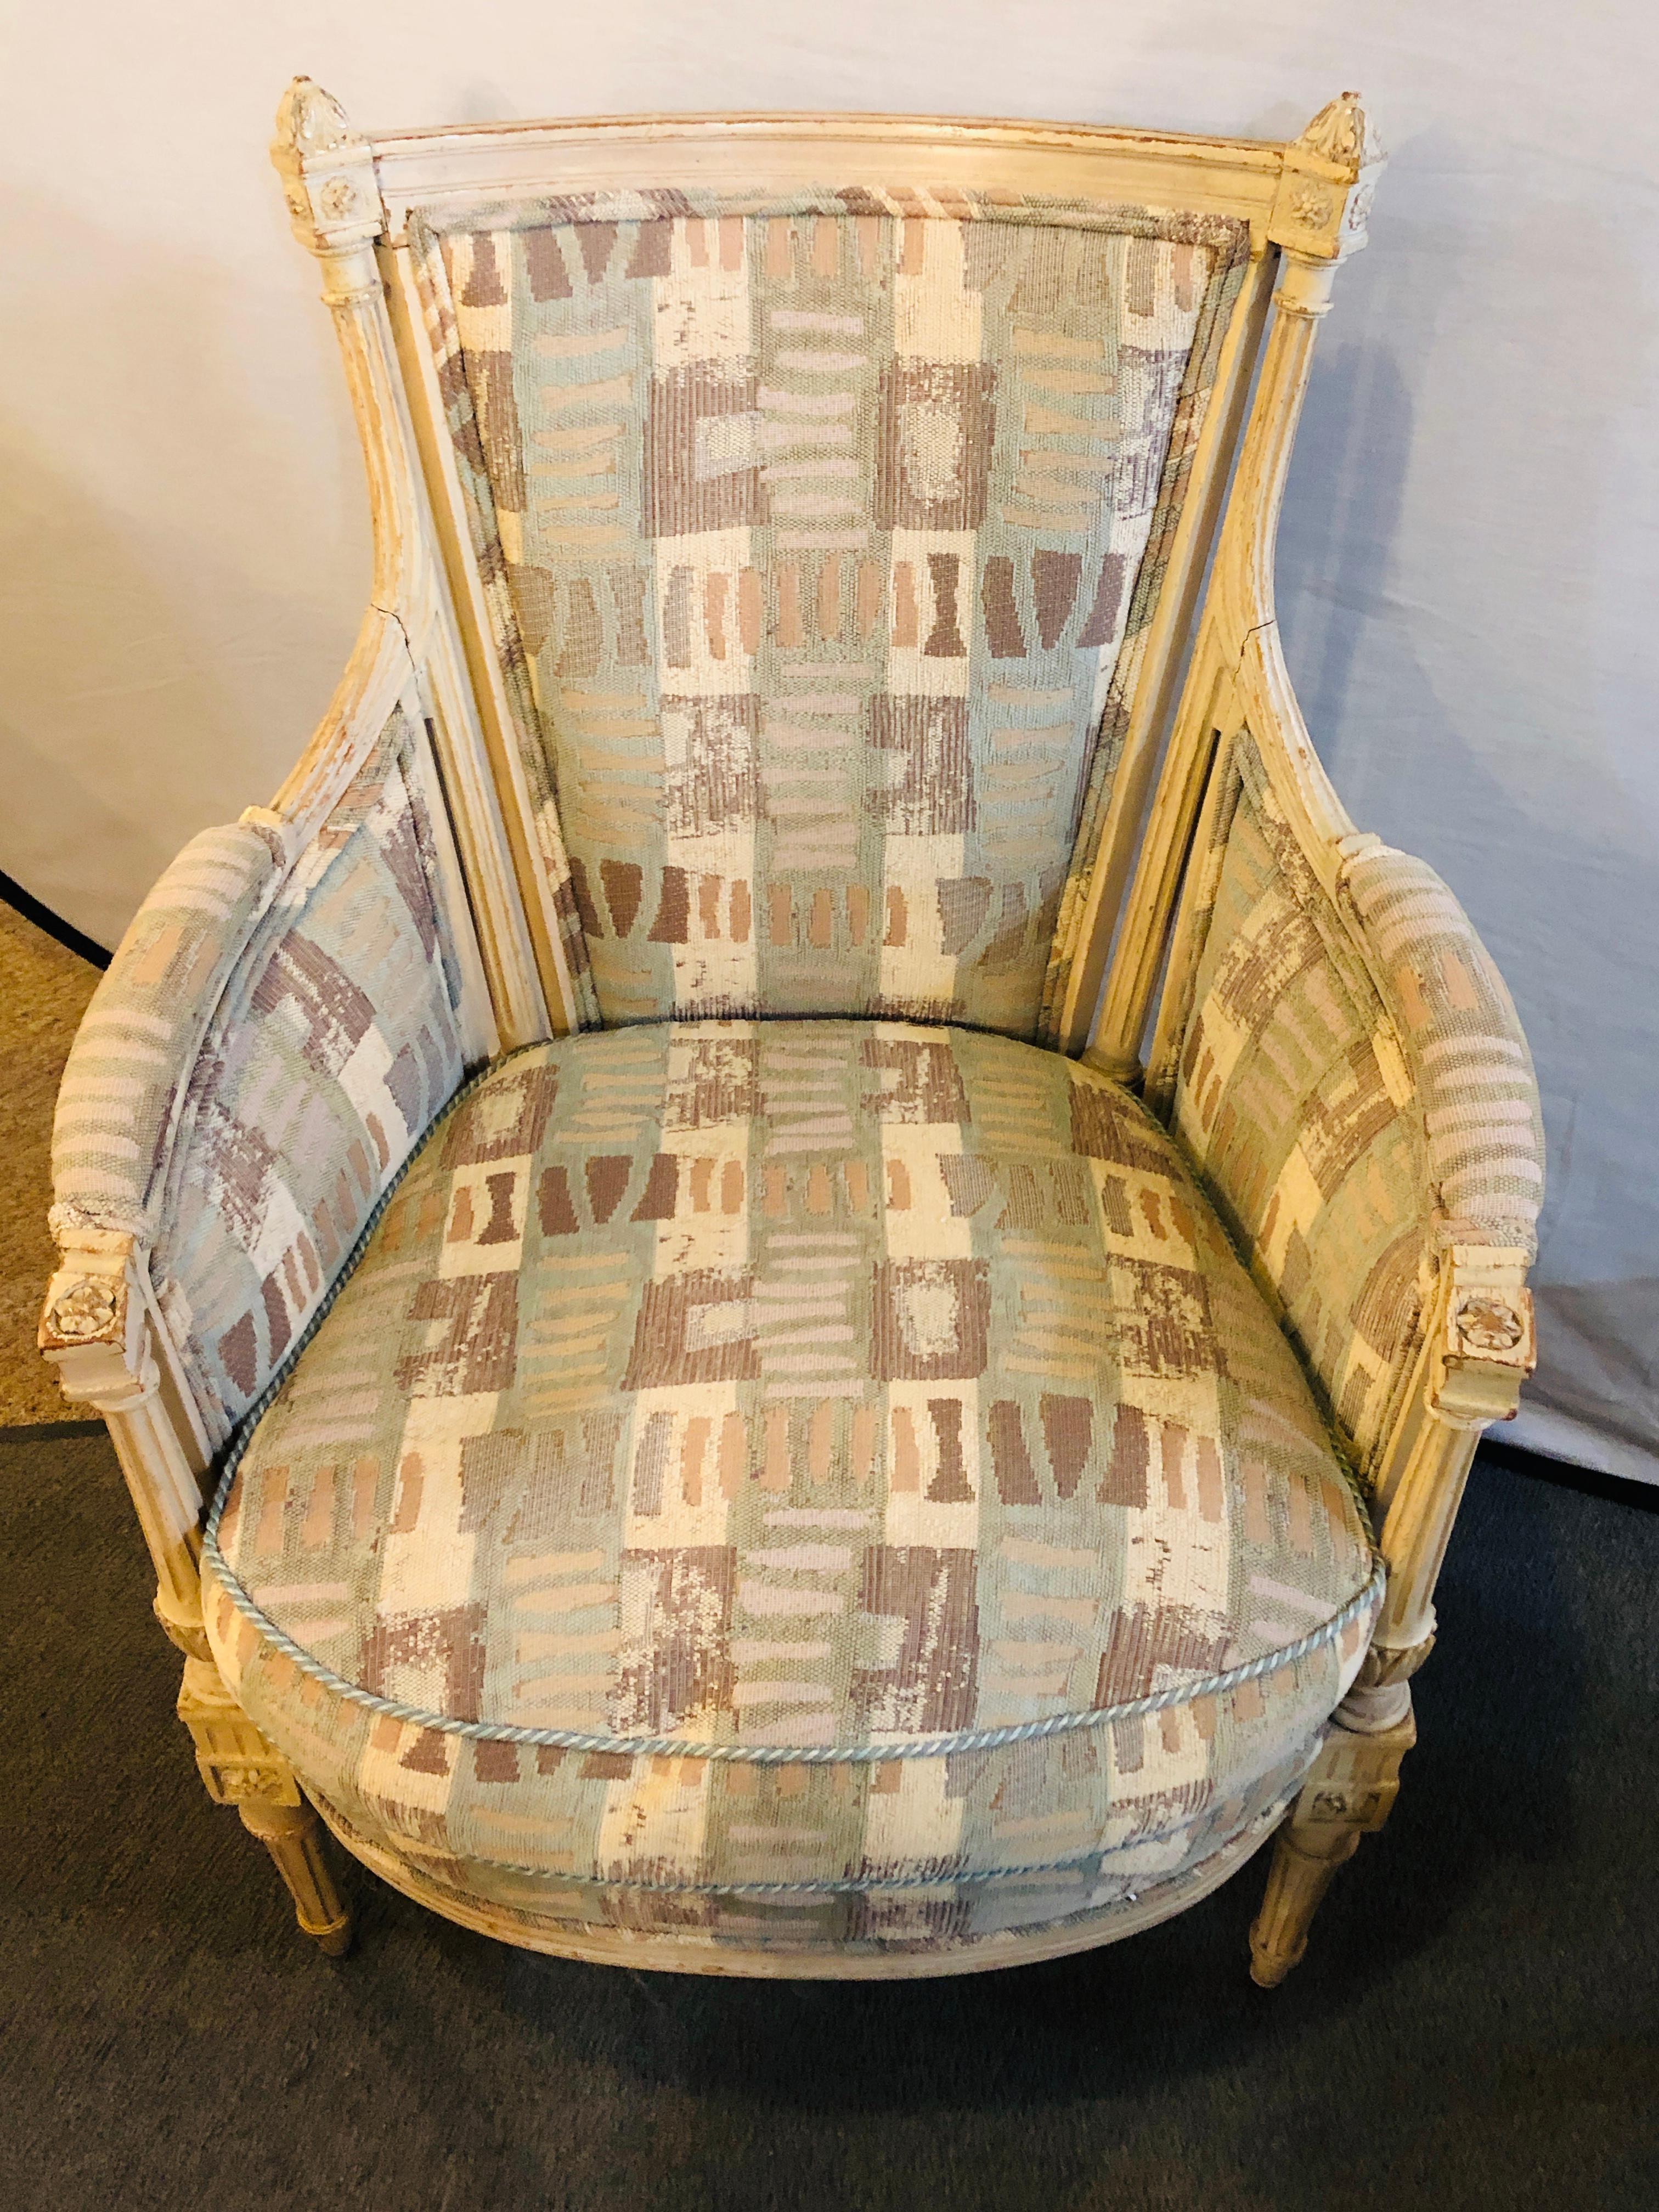 Pair of Hollywood Regency Maison Jansen bergere or armchairs beautifully re-upholstered. Done in a distressed Swedish finish these fine Louis XVI Style chairs are simply stunning and are sure to add elegant style to any home decor. Typical in style